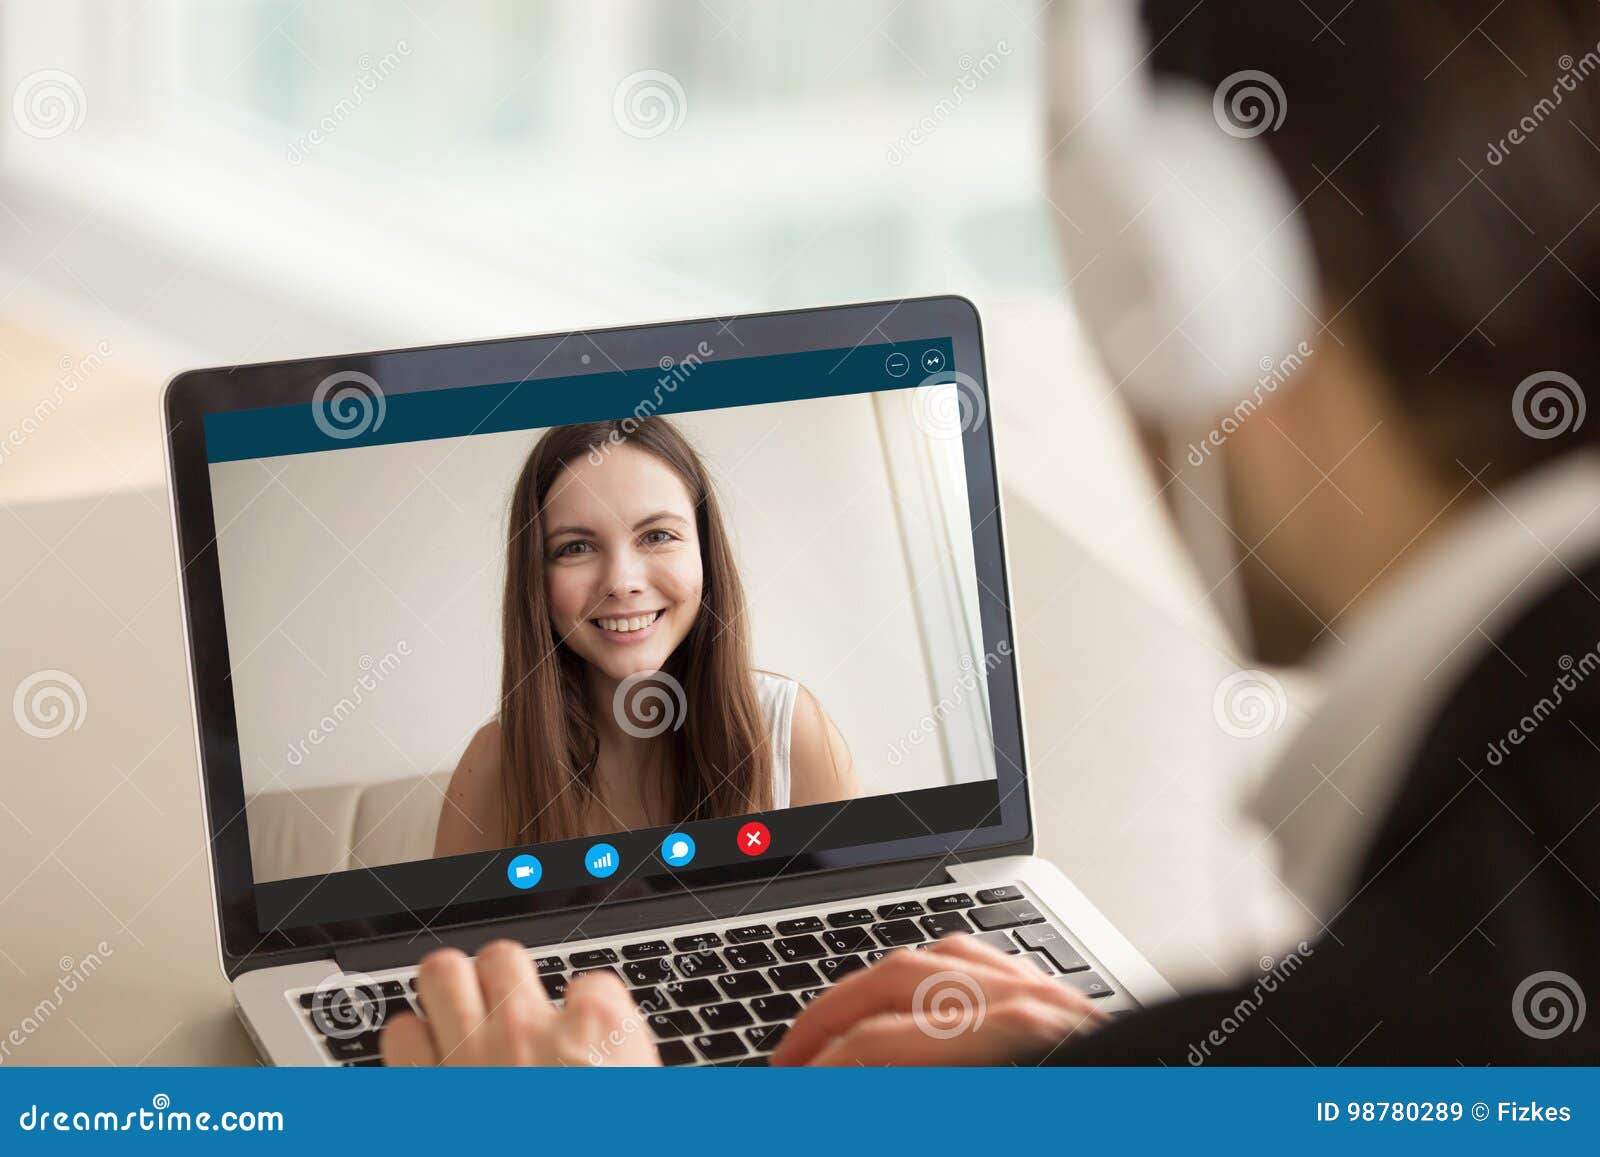 Chat with girls video online